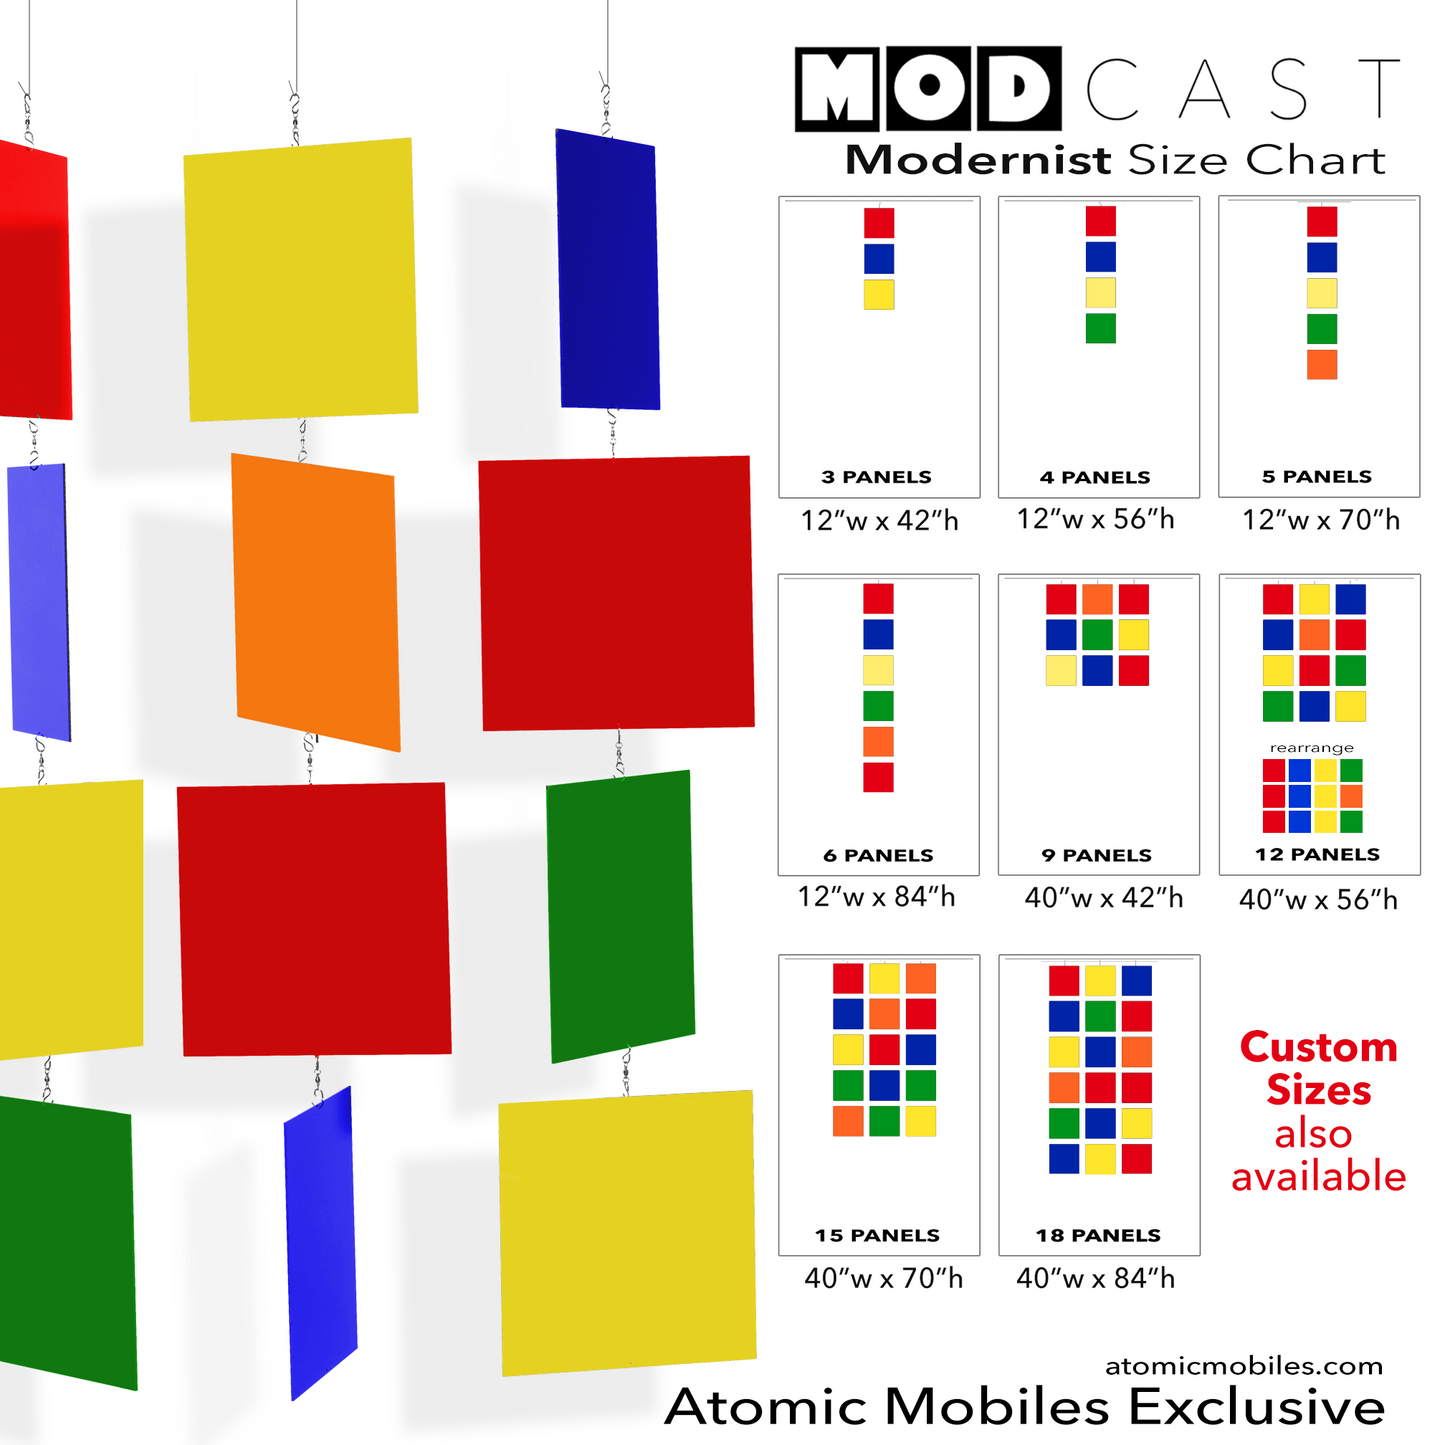 MODcast kinetic hanging art mobiles in Orange, Red, Navy Blue, Green, and Yellow acrylic plexiglass panels - mid century modern style home decor by AtomicMobiles.com